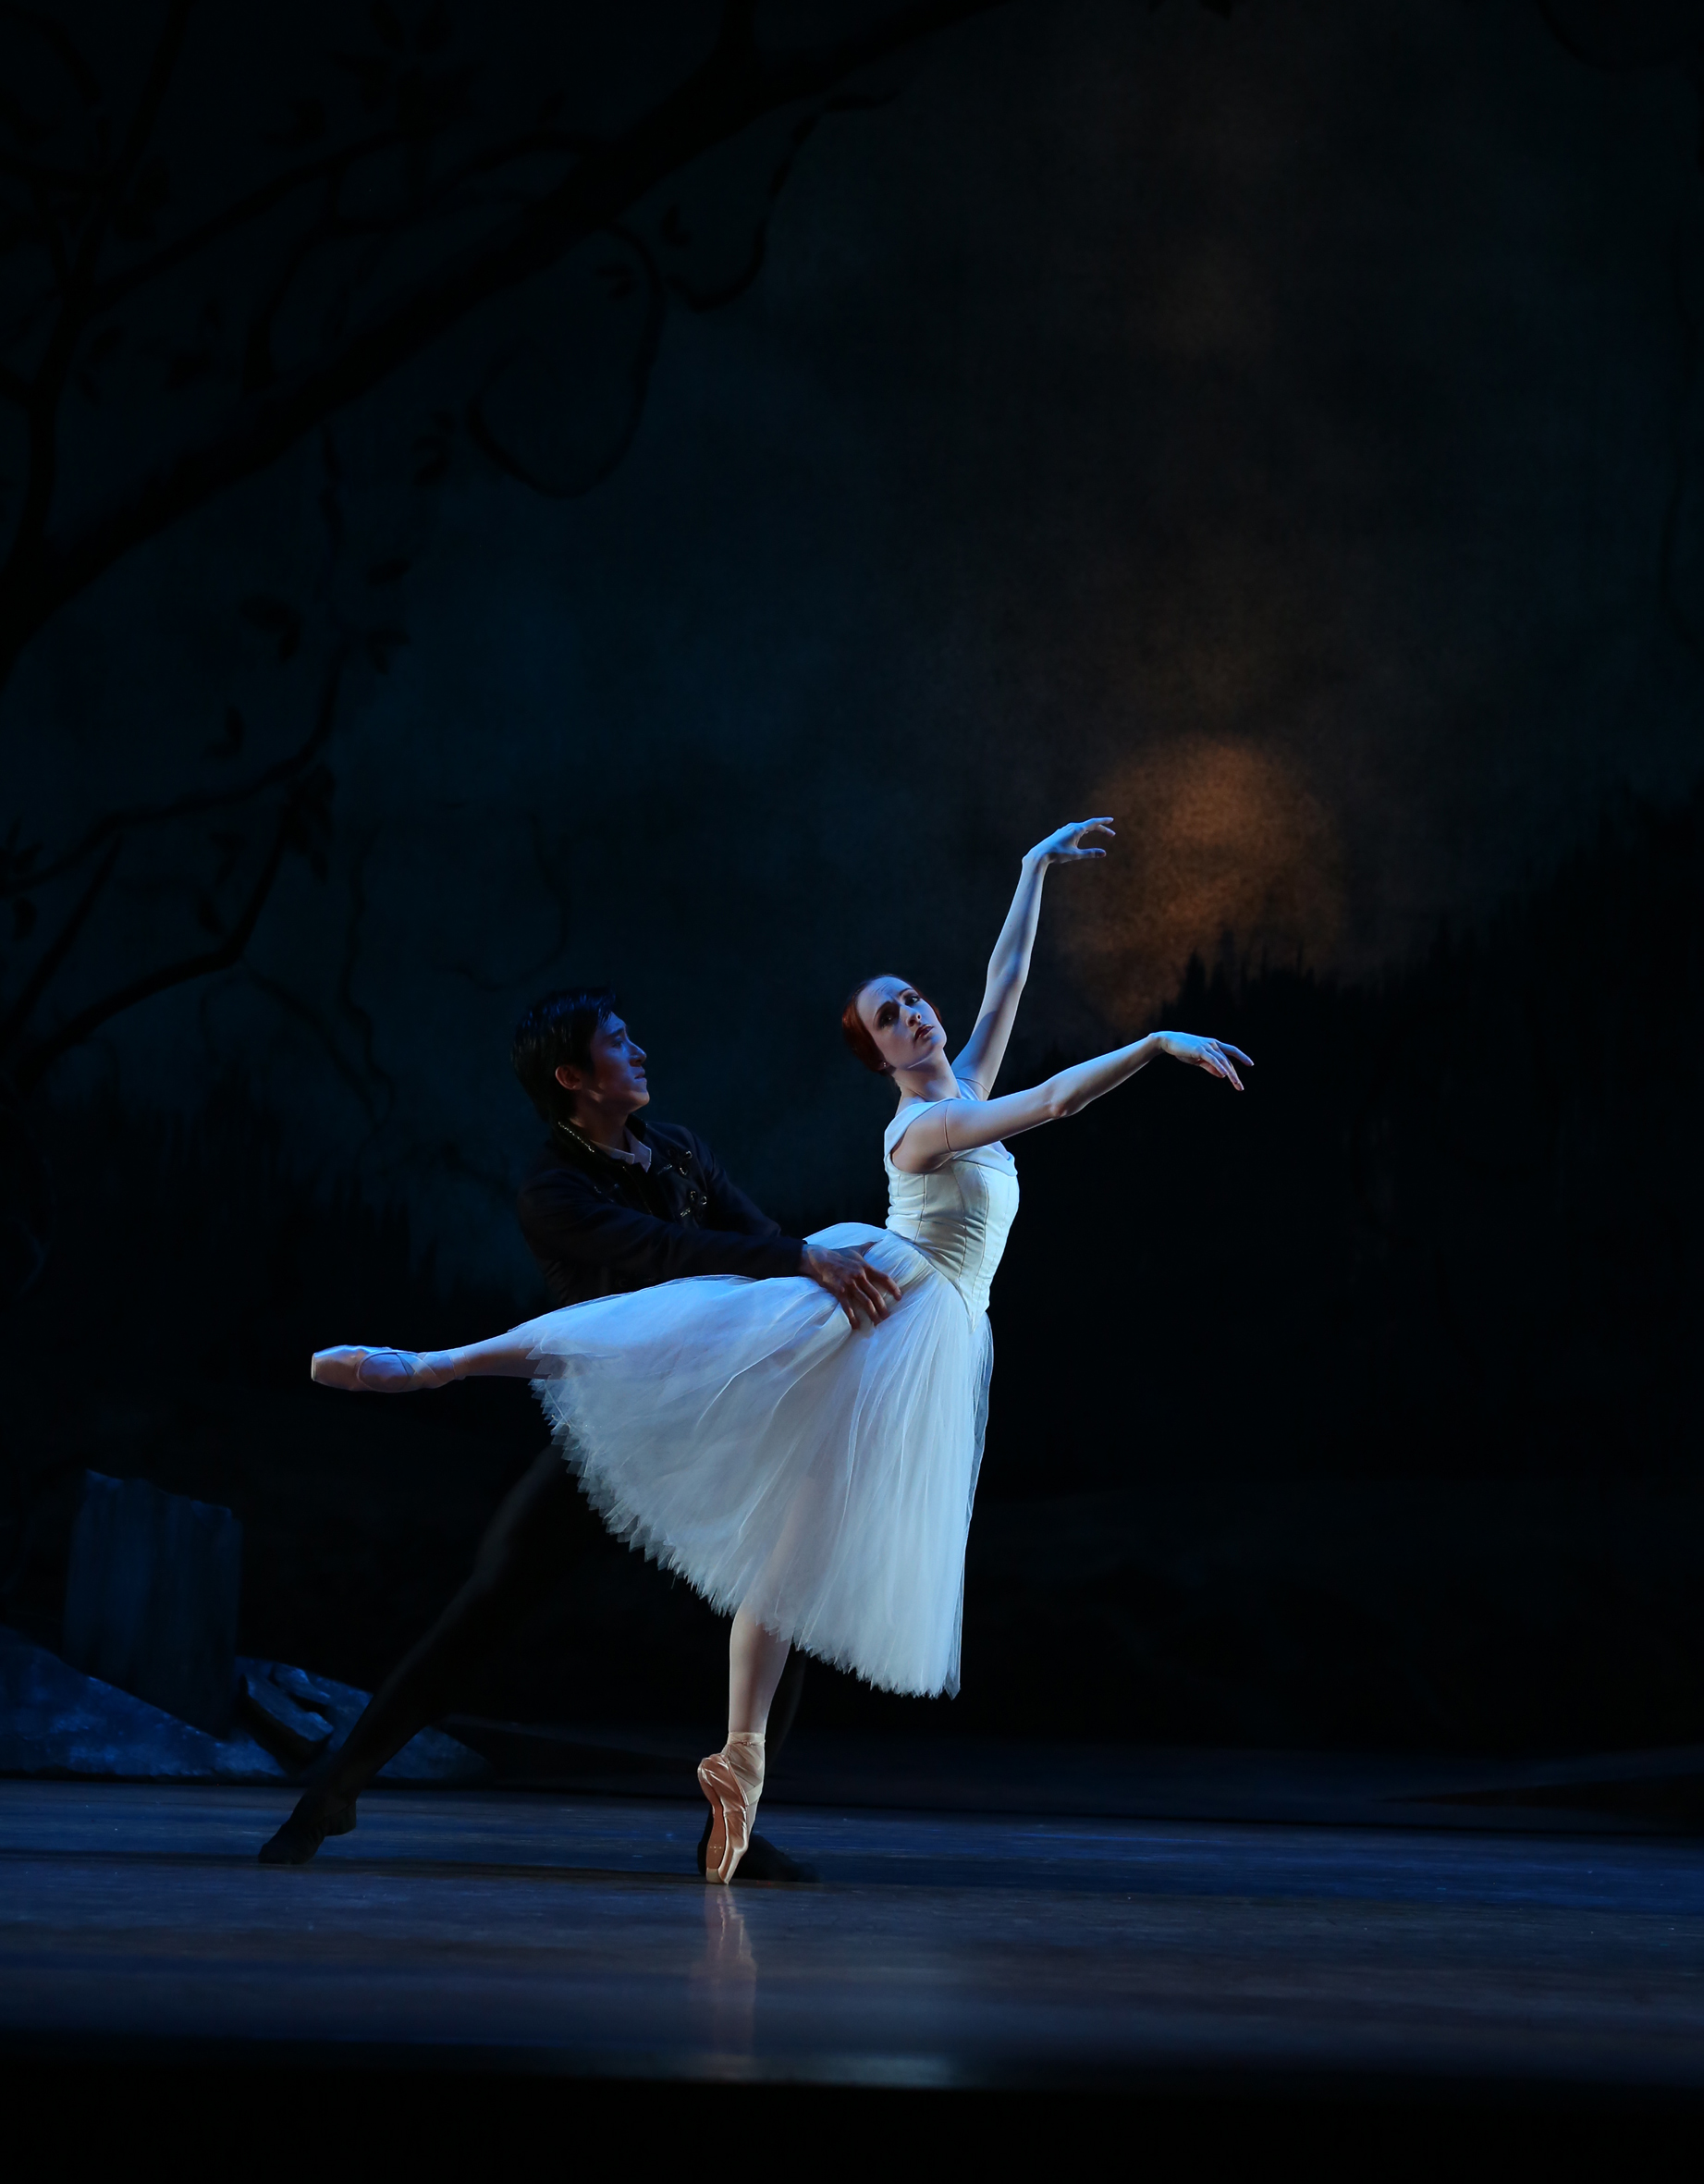 Two dancers from Giselle under dramatic lighting.